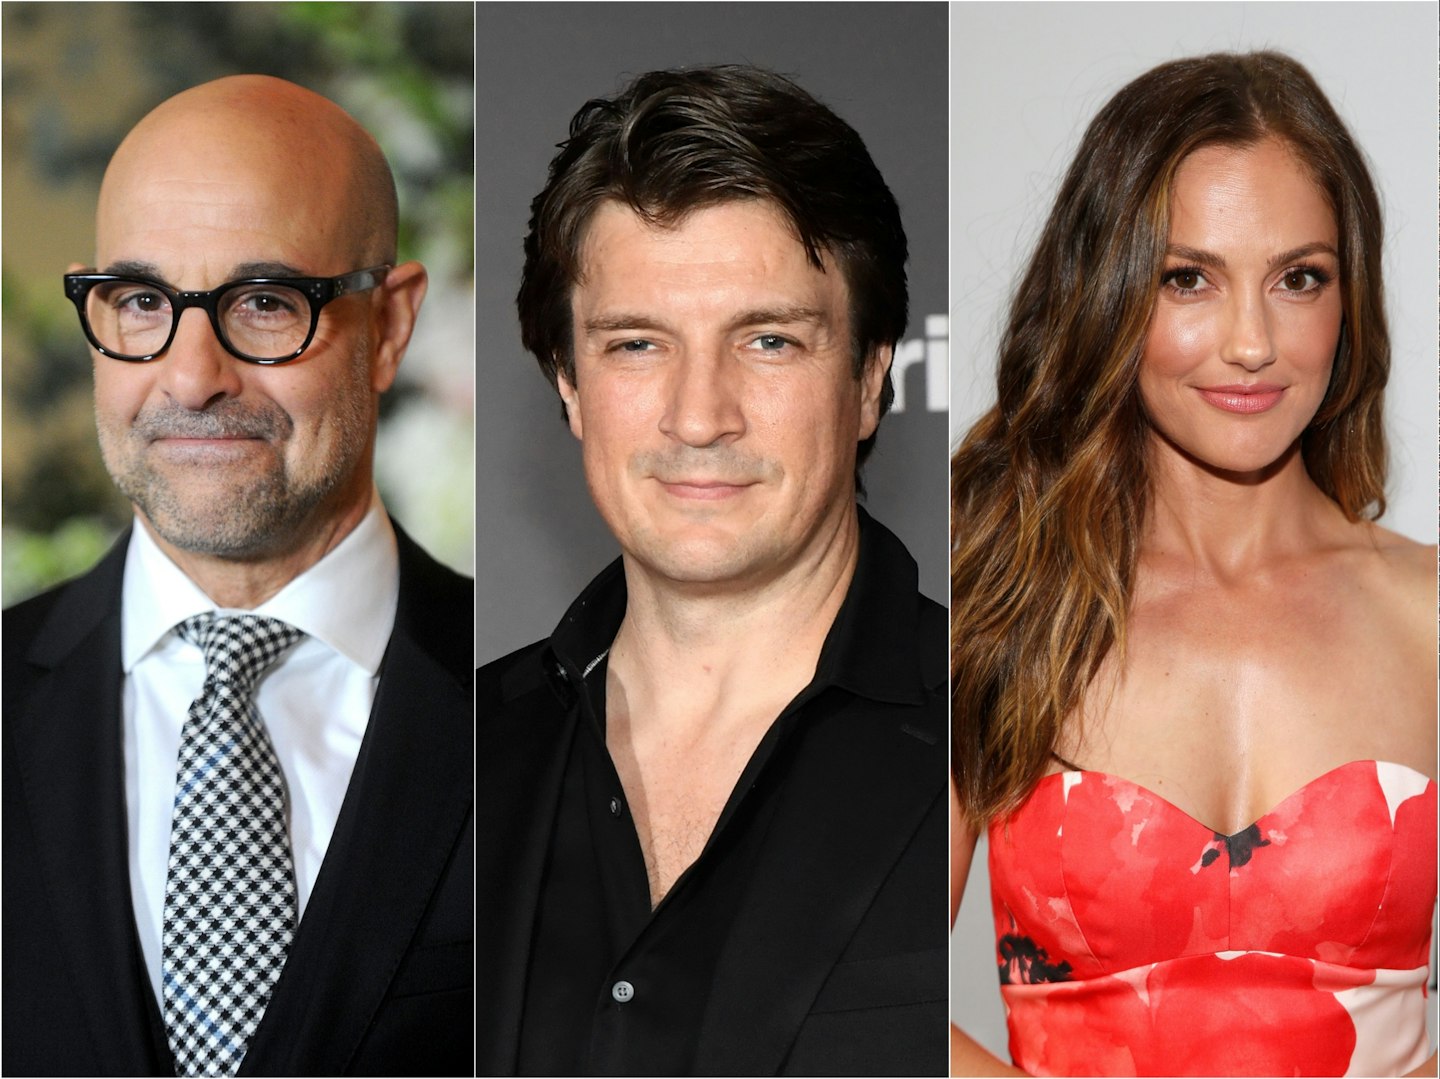 Stanley Tucci, Nathan Fillion and Minka Kelly